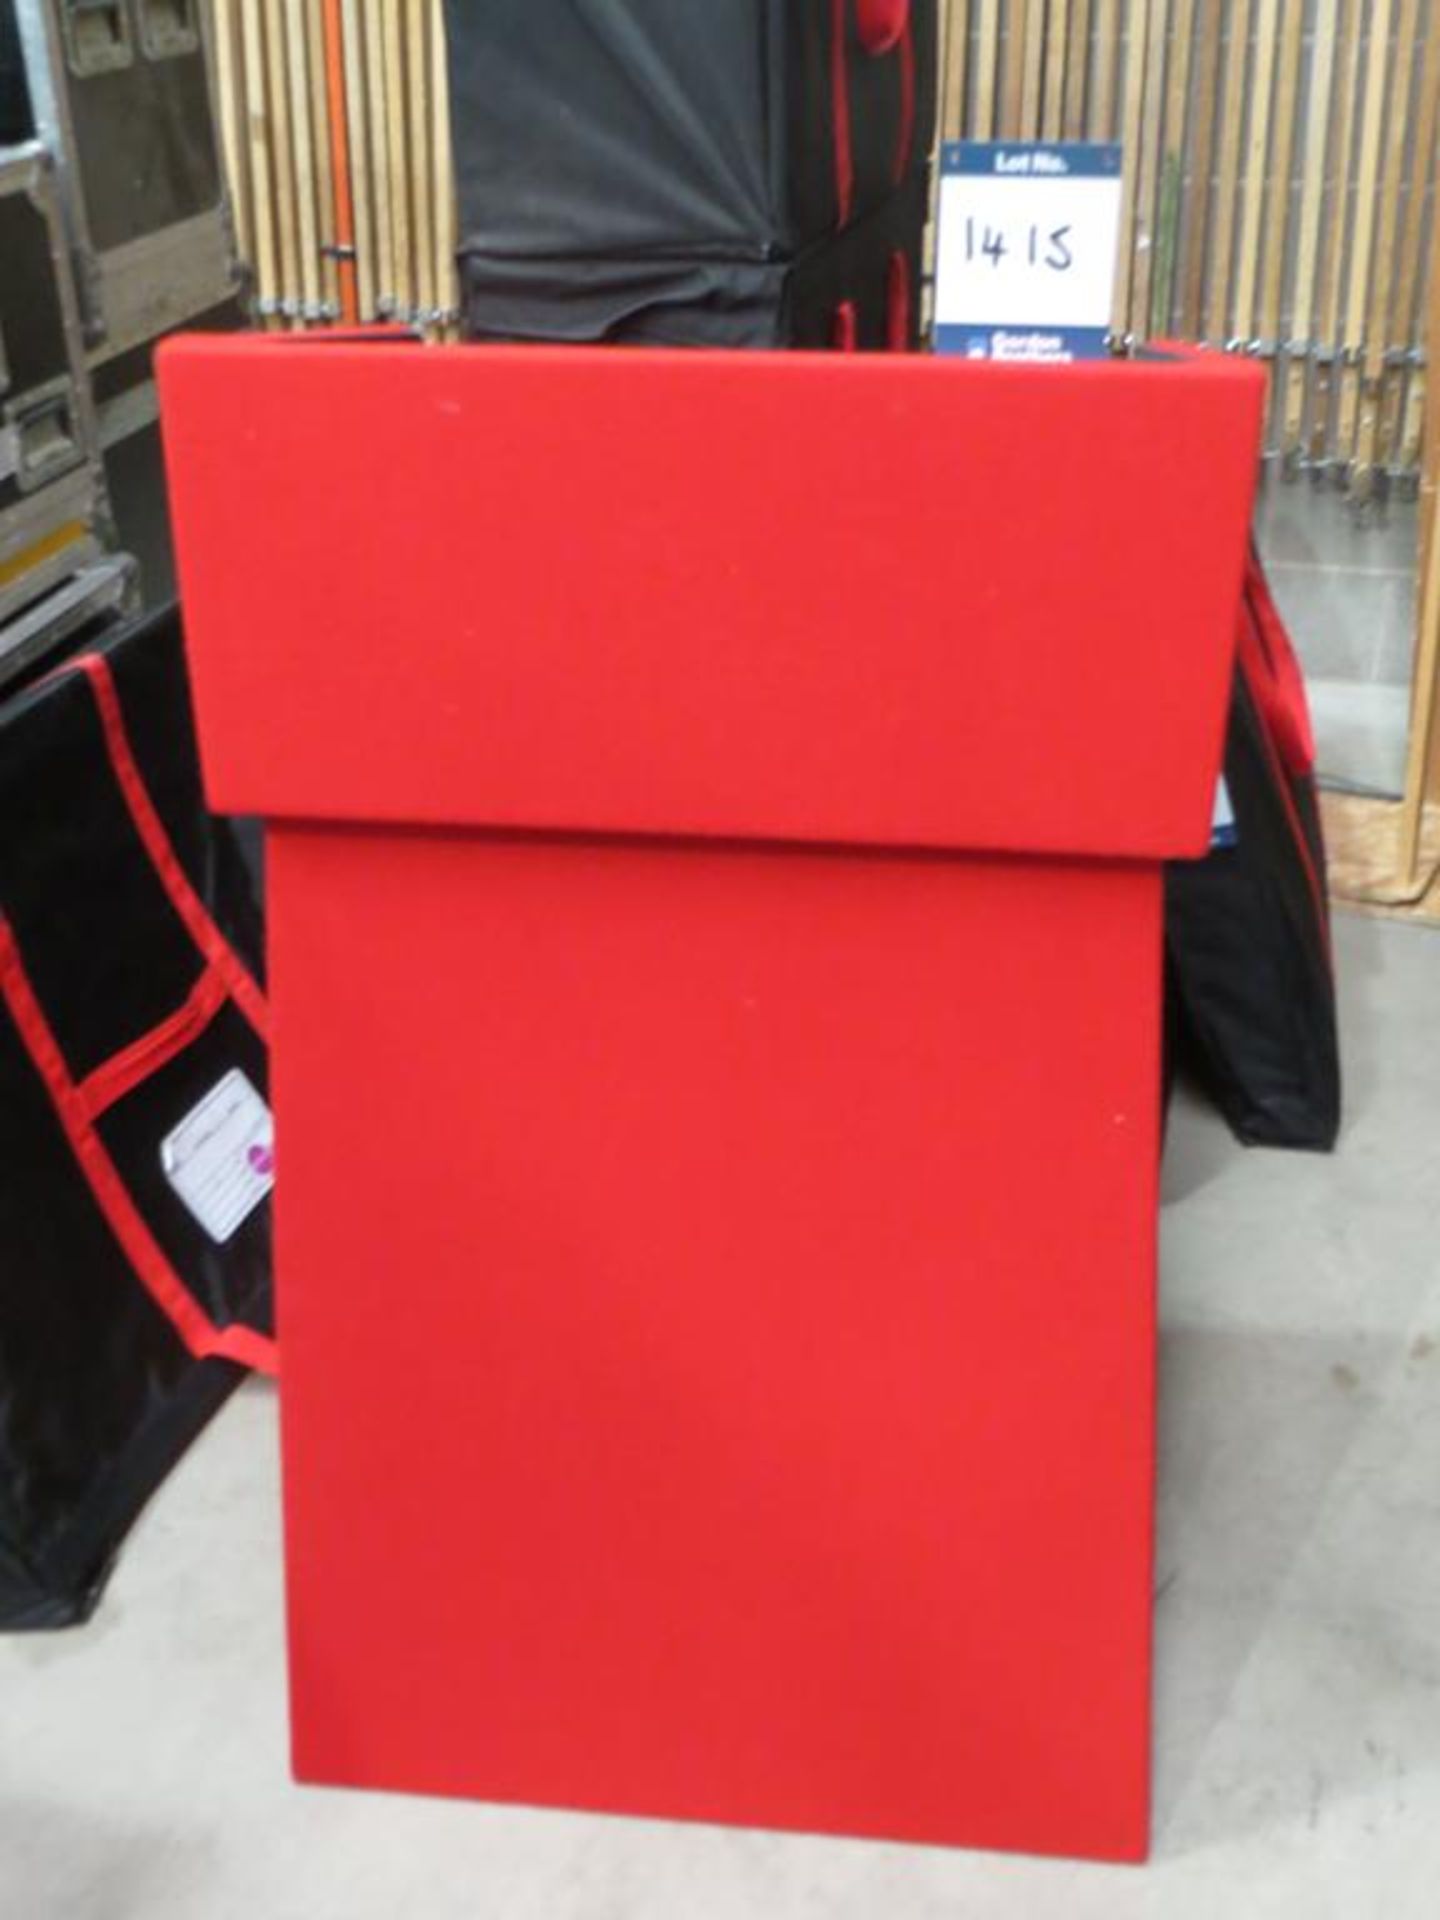 Red two part conference lectern in 2x No. soft carry bags: Unit 500, Eckersall Road, Birmingham